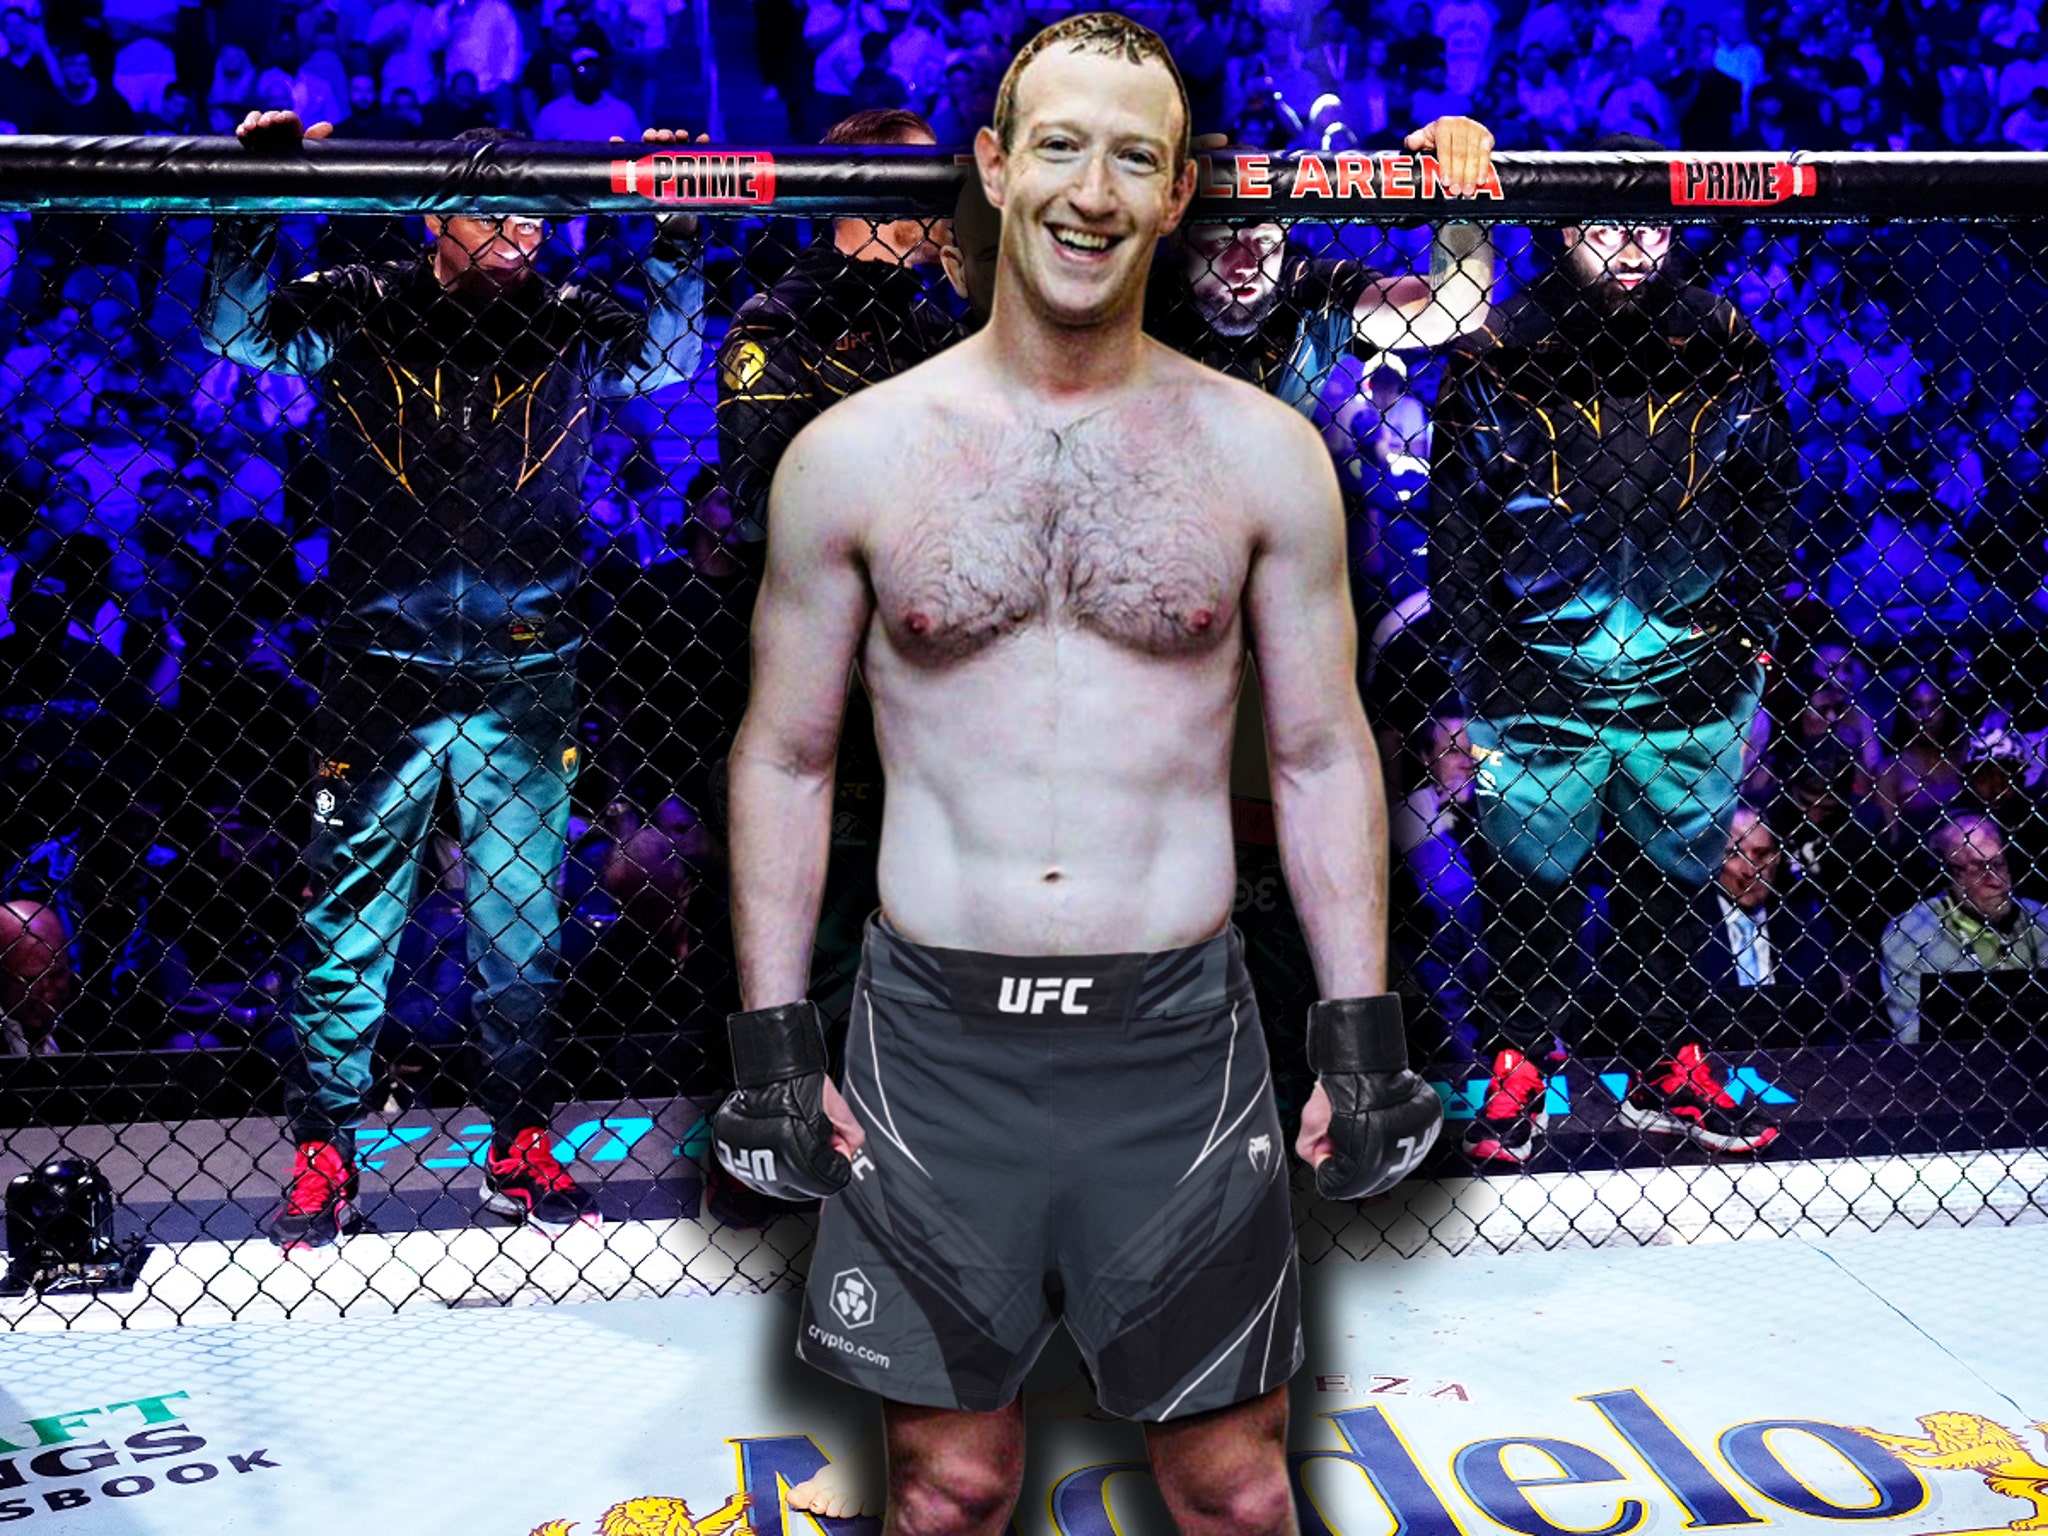 Mark Zuckerberg Indicates He Now Wants MMA Match with UFC Fighter